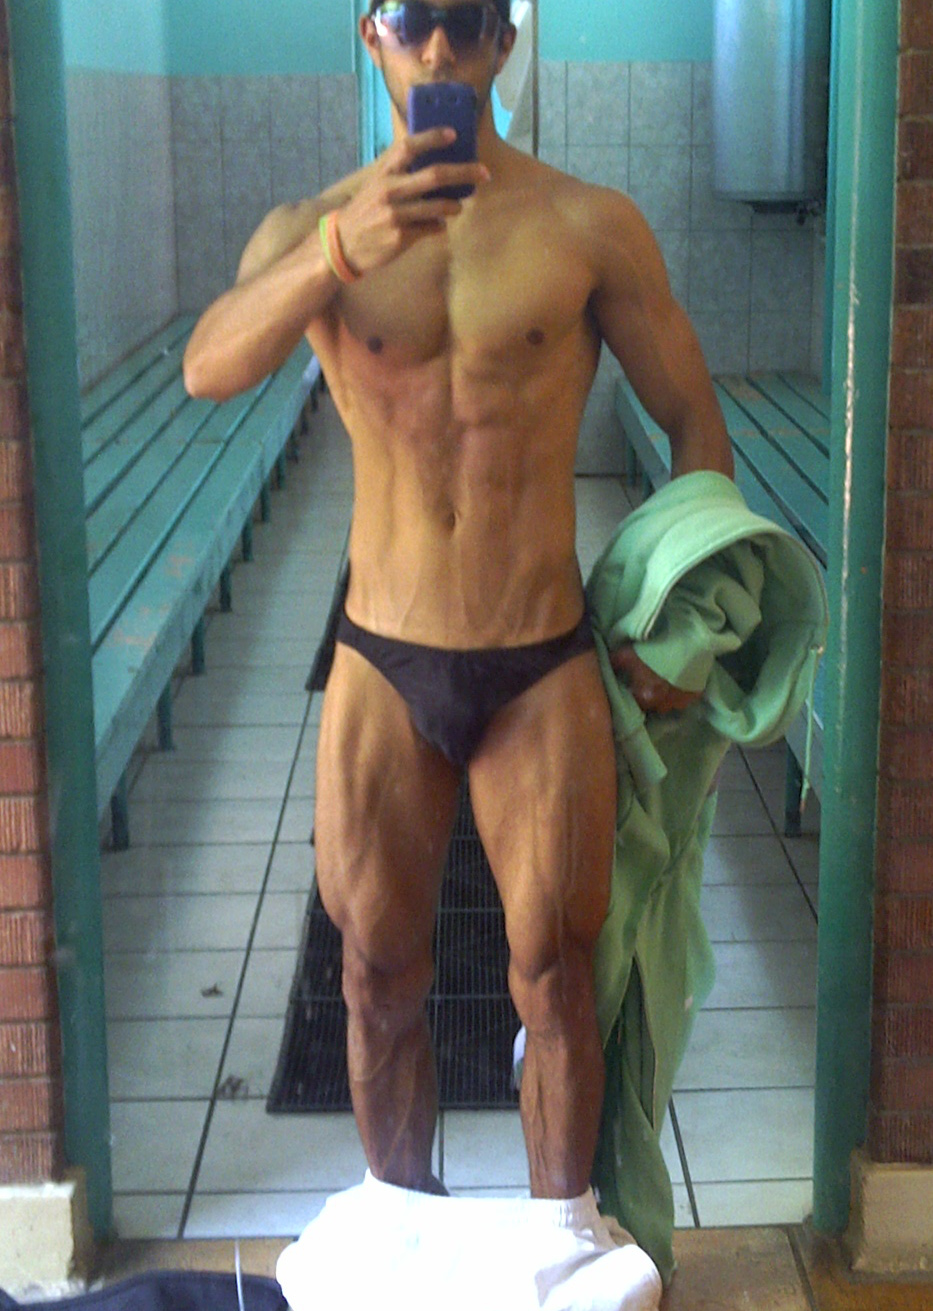 The Road To Your First Bodybuilding Competition And Getting Lean, How I Did It